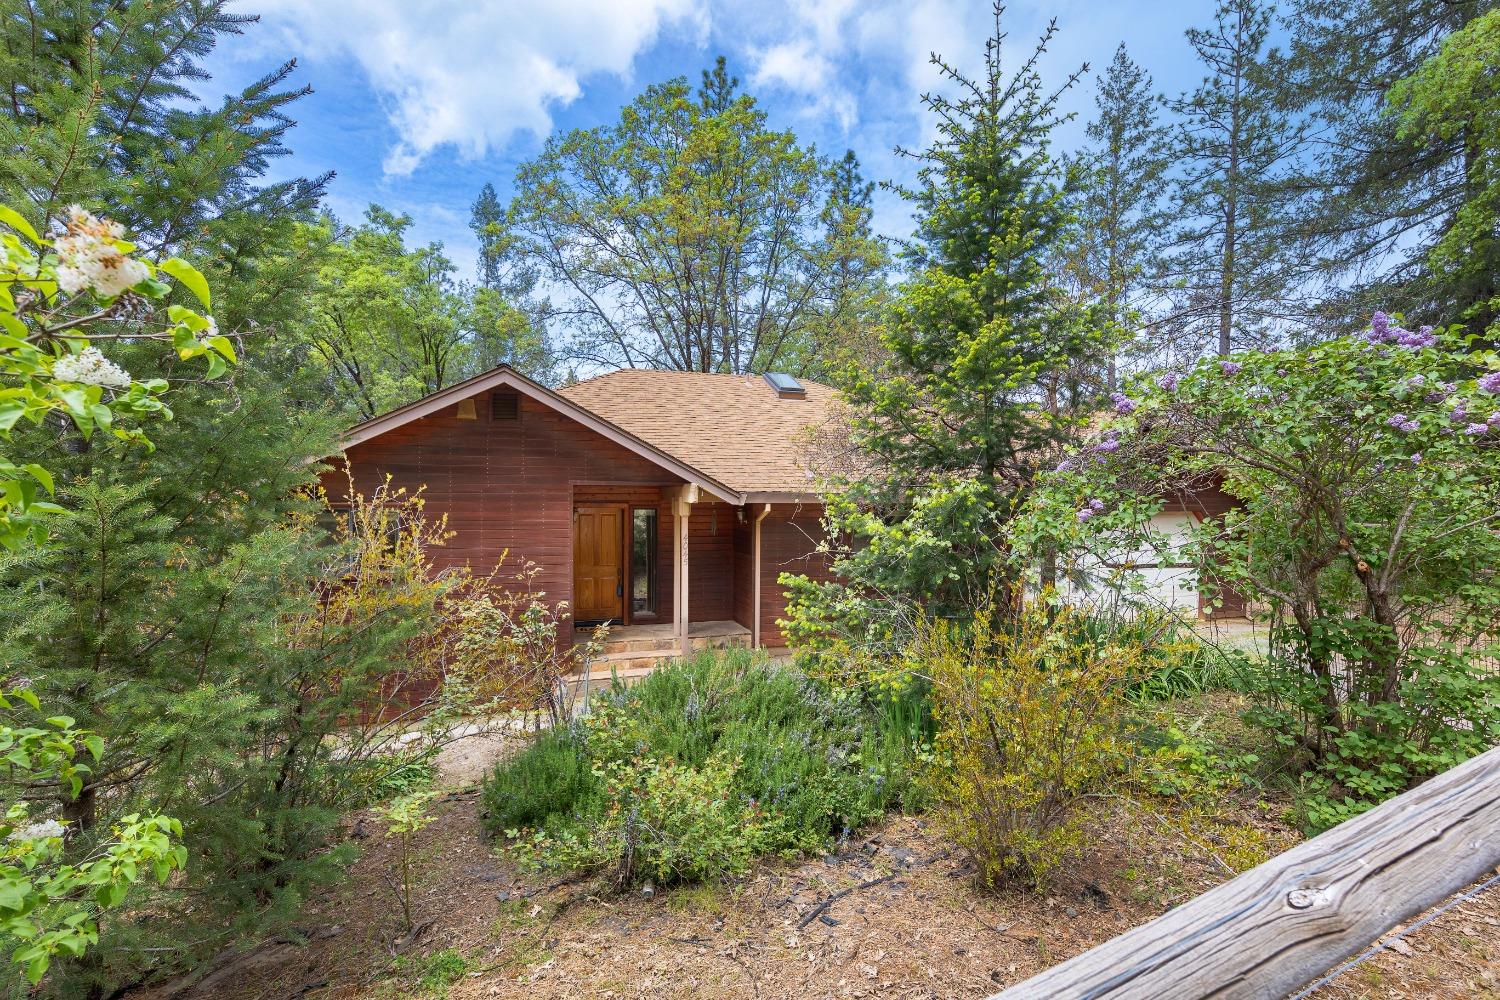 Photo of 4045 Pine Mountain Rd in Foresthill, CA